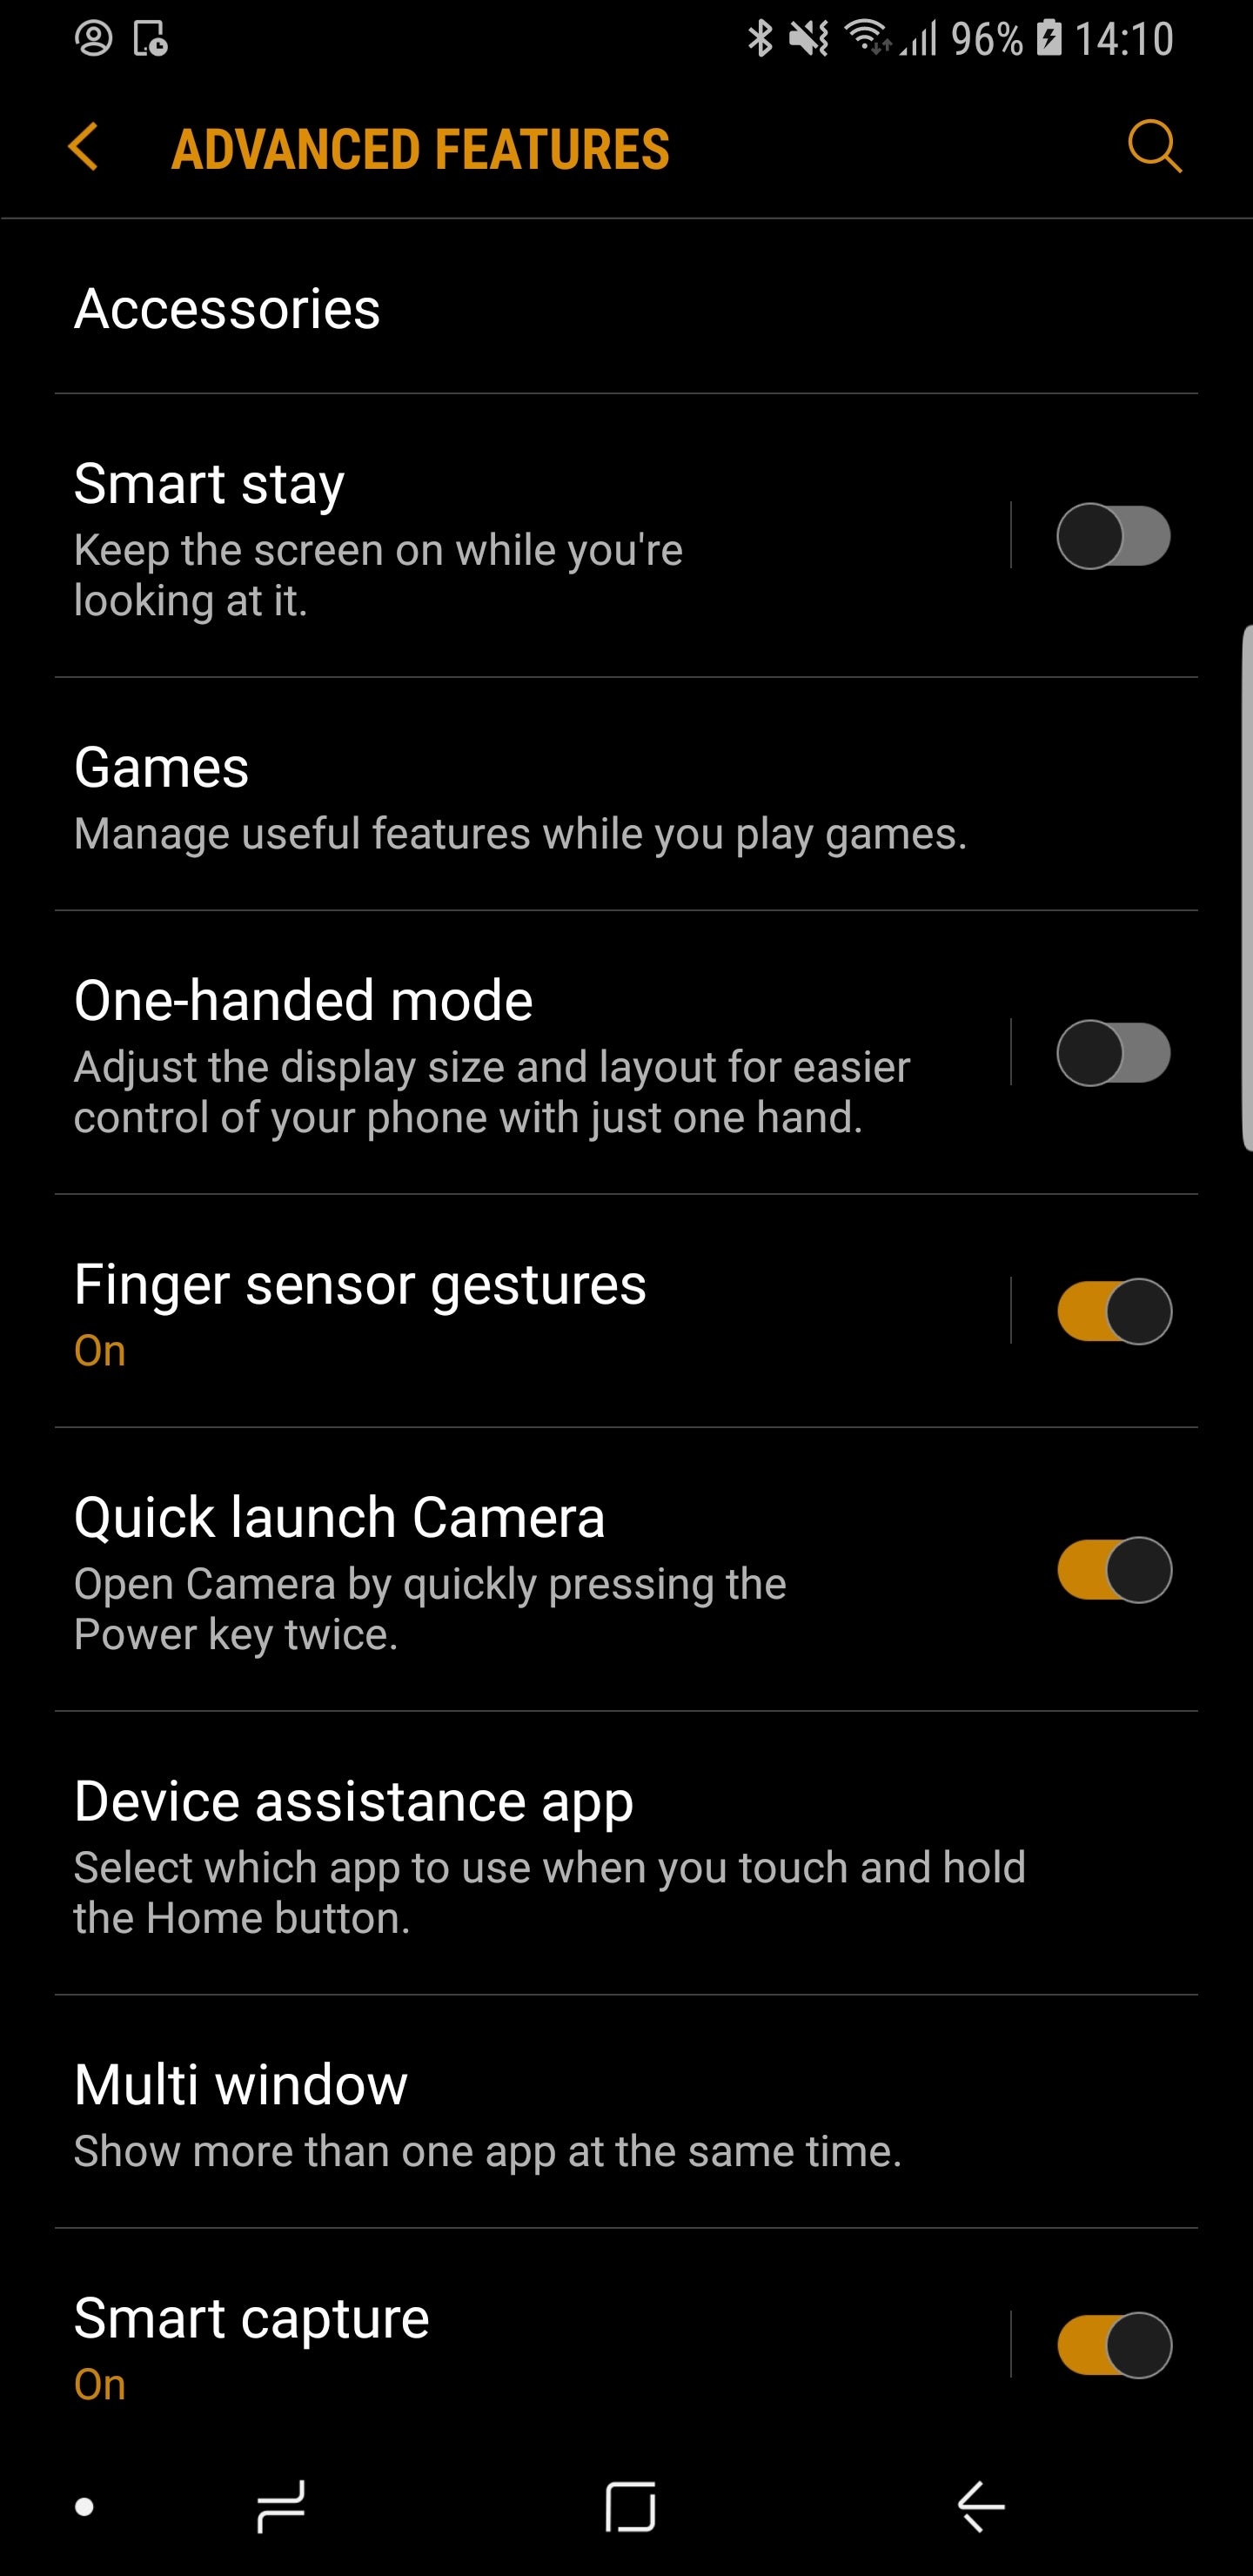 Advanced features of the Galaxy S9/S9+ - Samsung Galaxy S9/S9+ customization guide: All the essential settings you should change